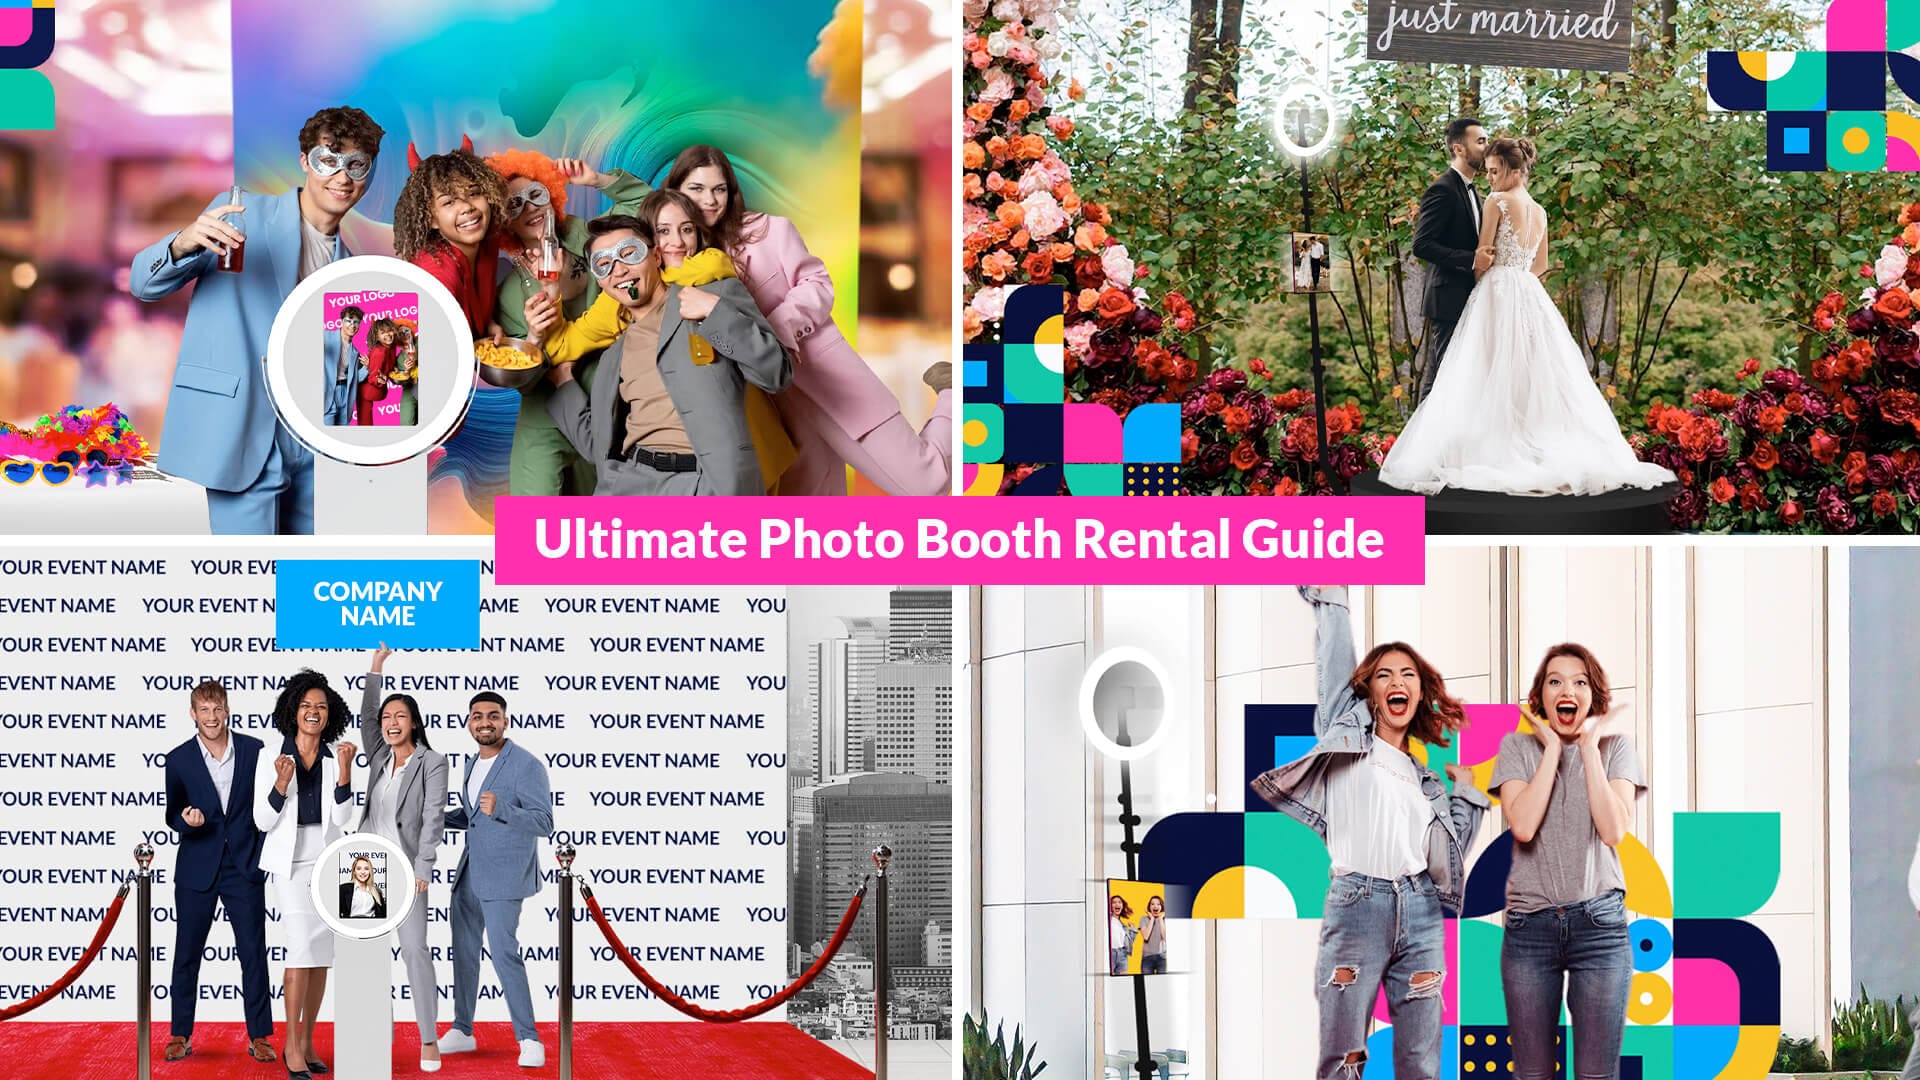 Finding a photo booth rental near you is easy!